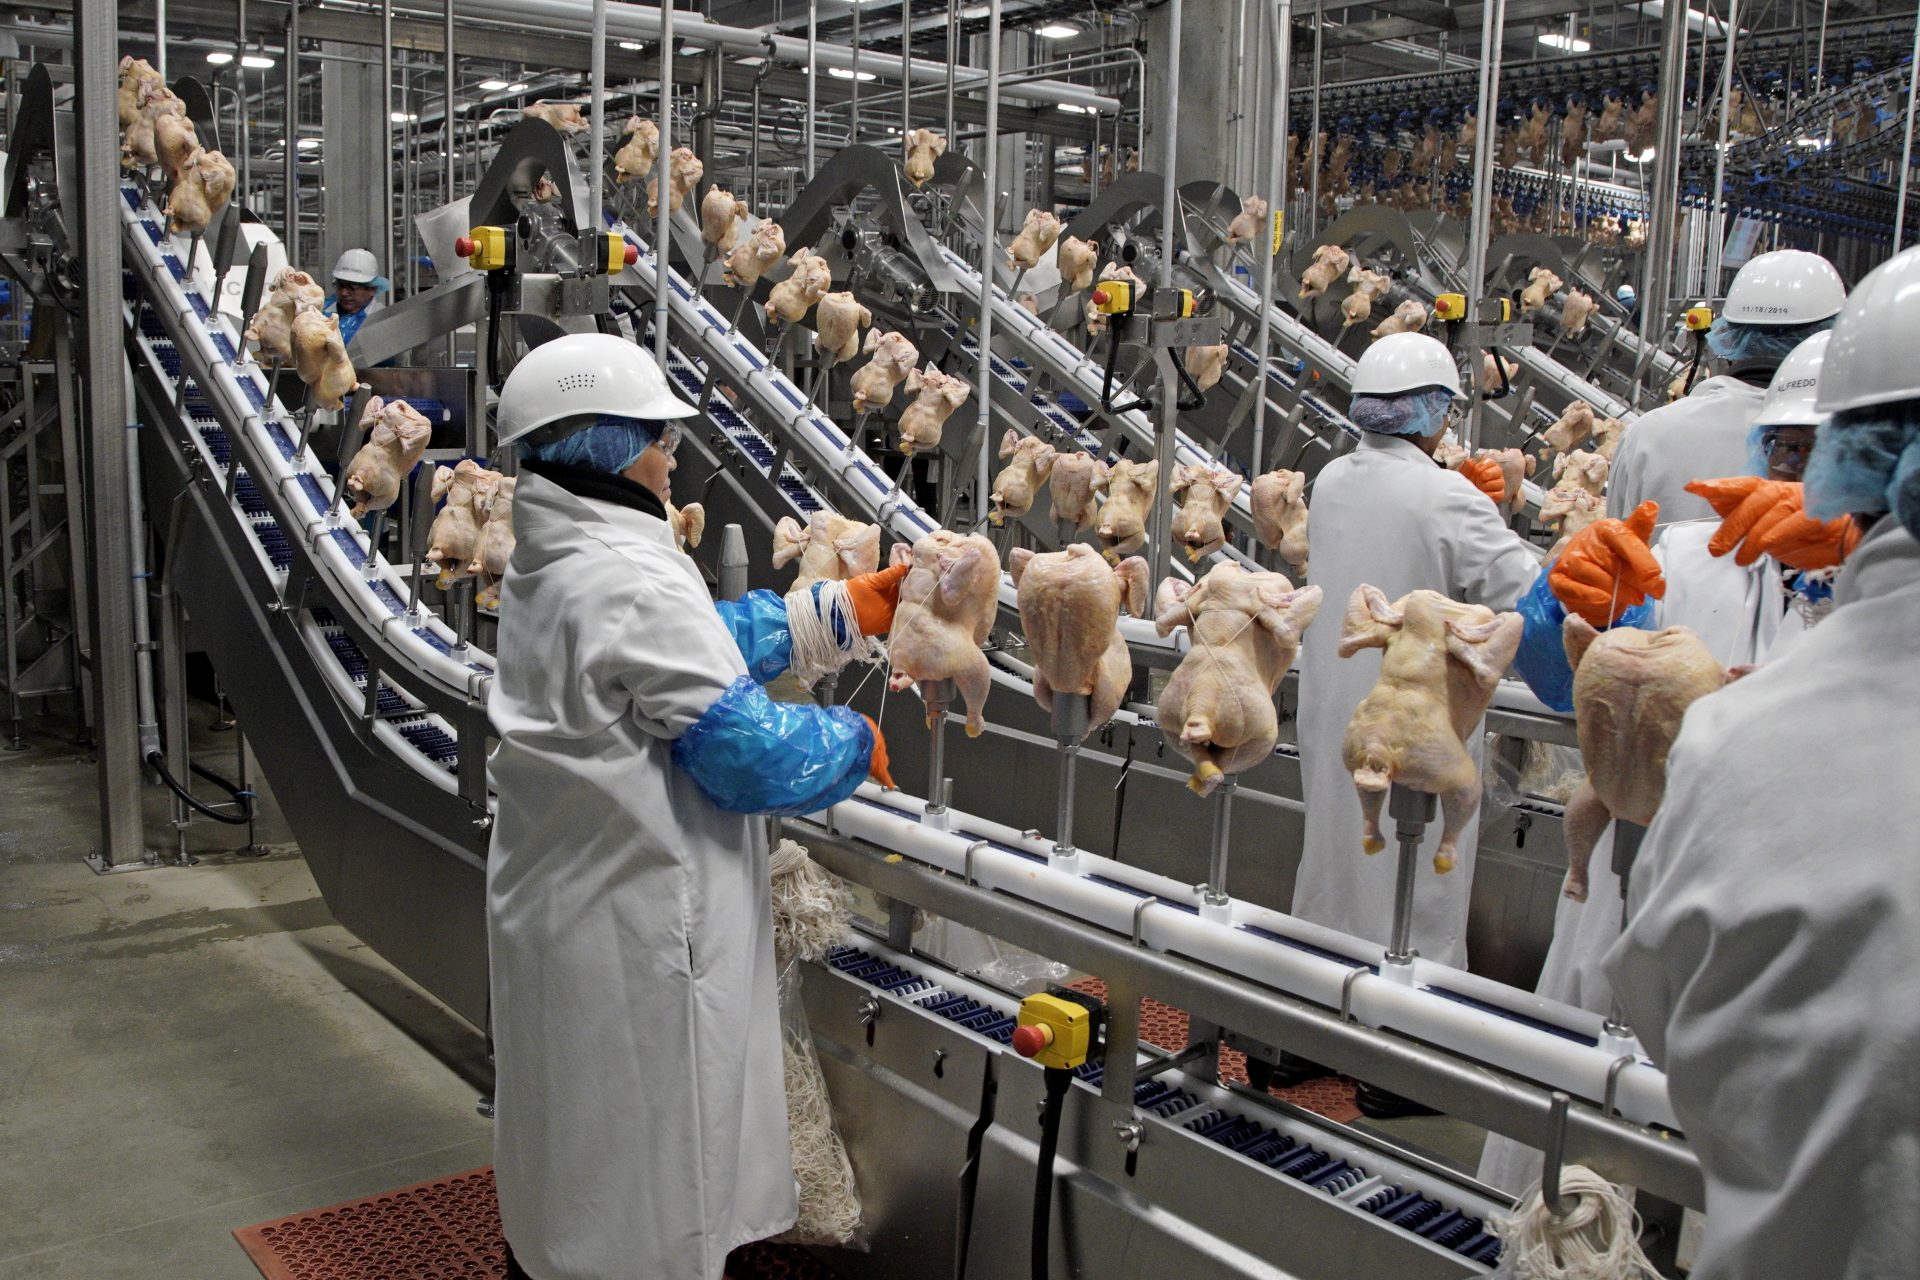 Workers process chickens at the Lincoln Premium Poultry plant, Costco Wholesale's dedicated poultry supplier, in Fremont, Neb., Thursday, Dec. 12, 2019.